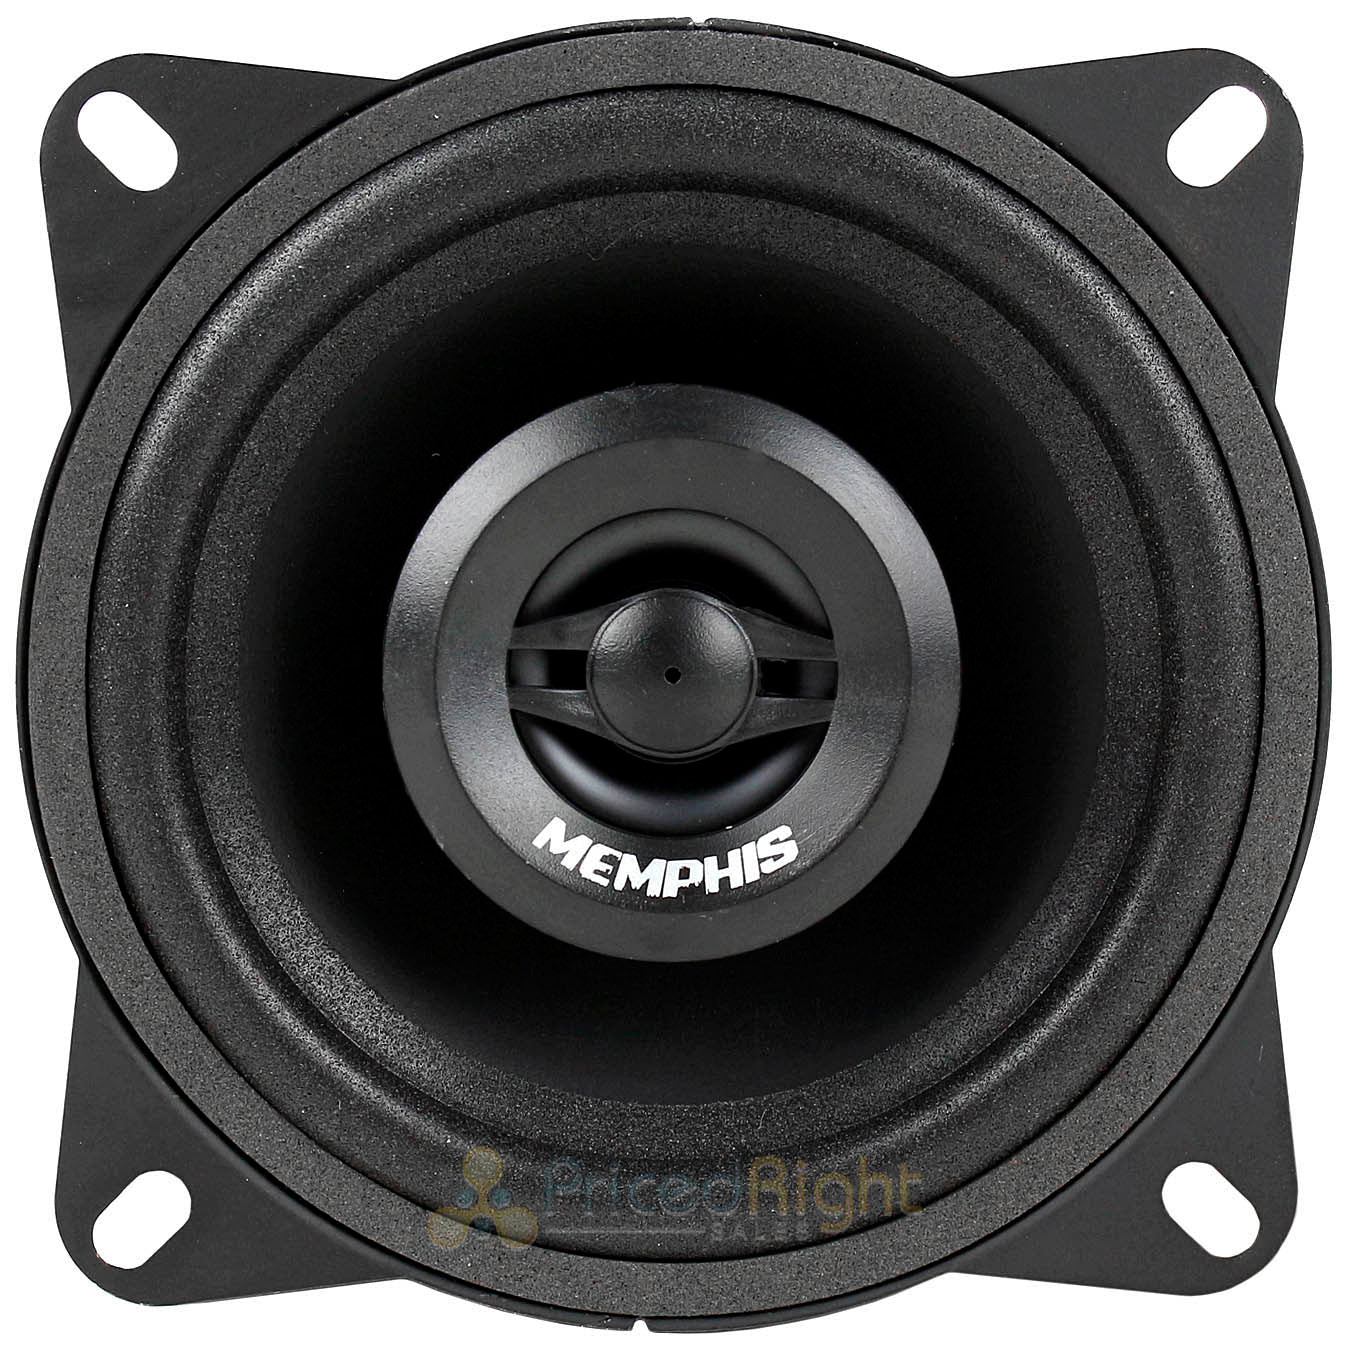 Memphis Audio 4" 2 Way Coaxial Speakers 80 Watts Max Street Reference SRX42